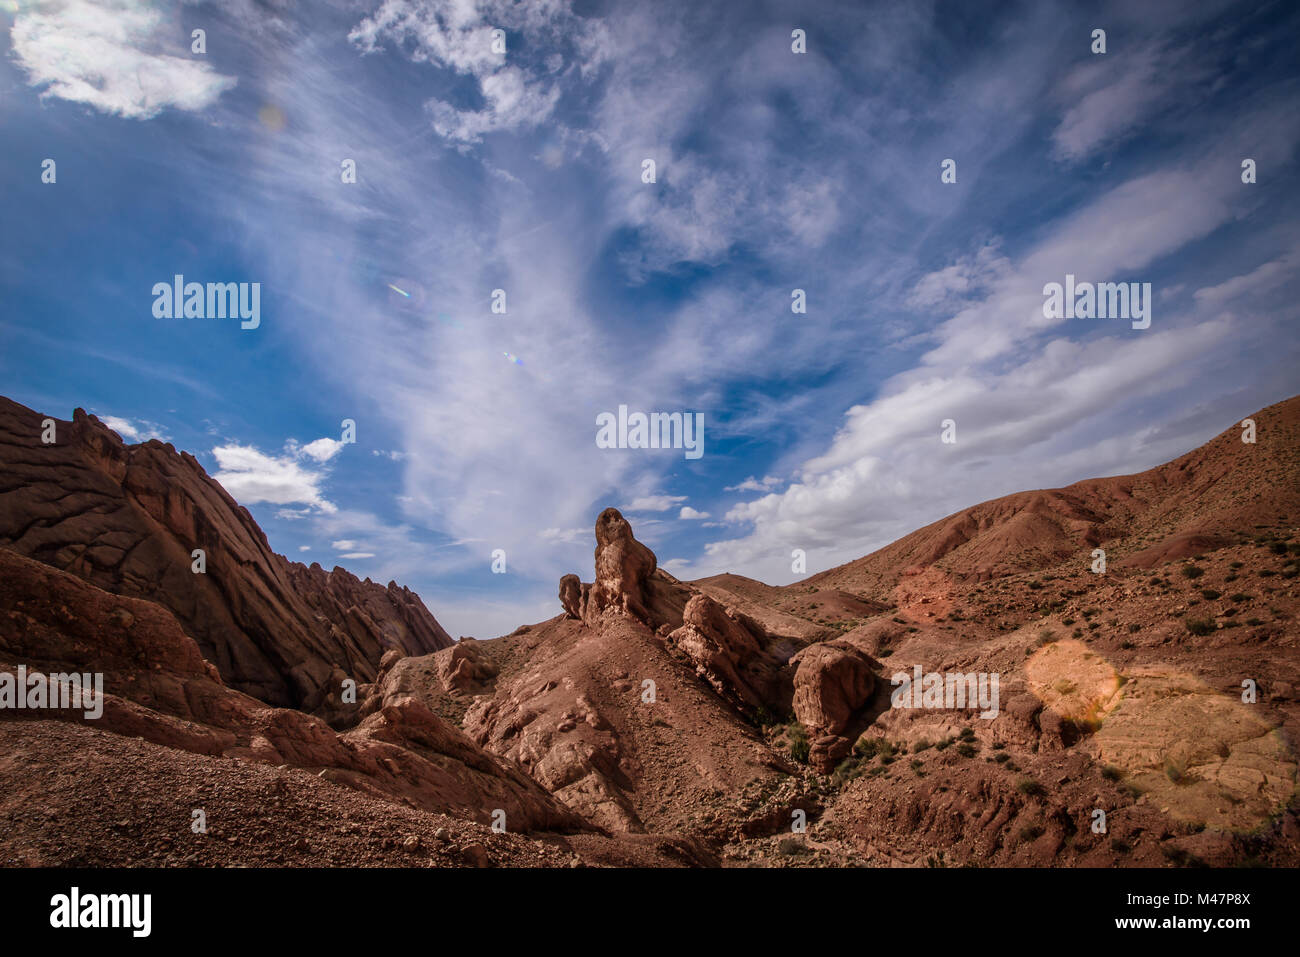 Scenic landscape in Dades Gorges, Atlas Mountains, Morocco Stock Photo